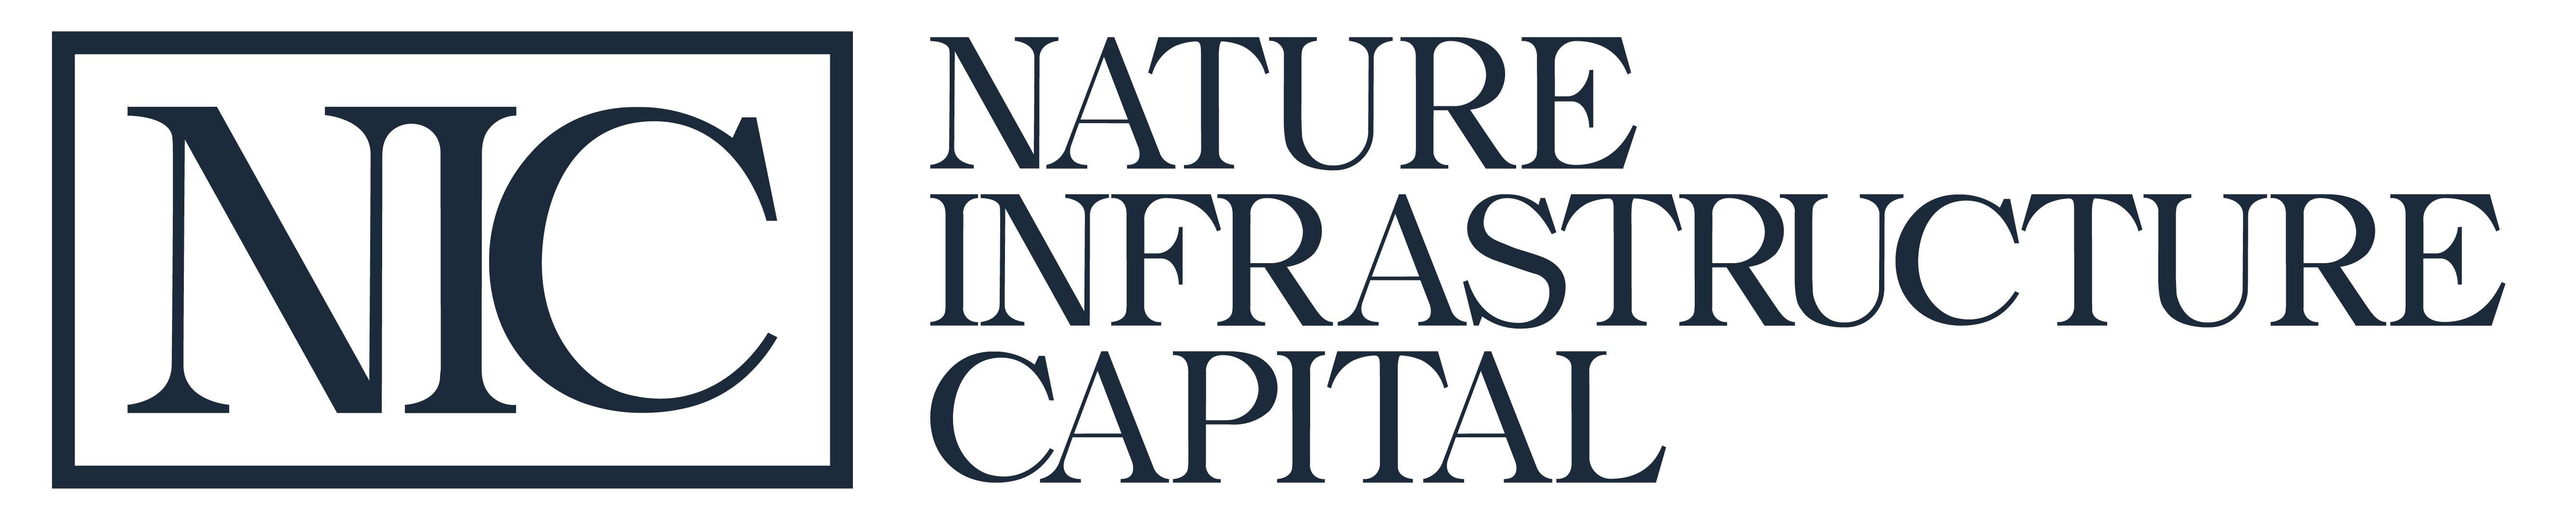 nature infrastructure capital